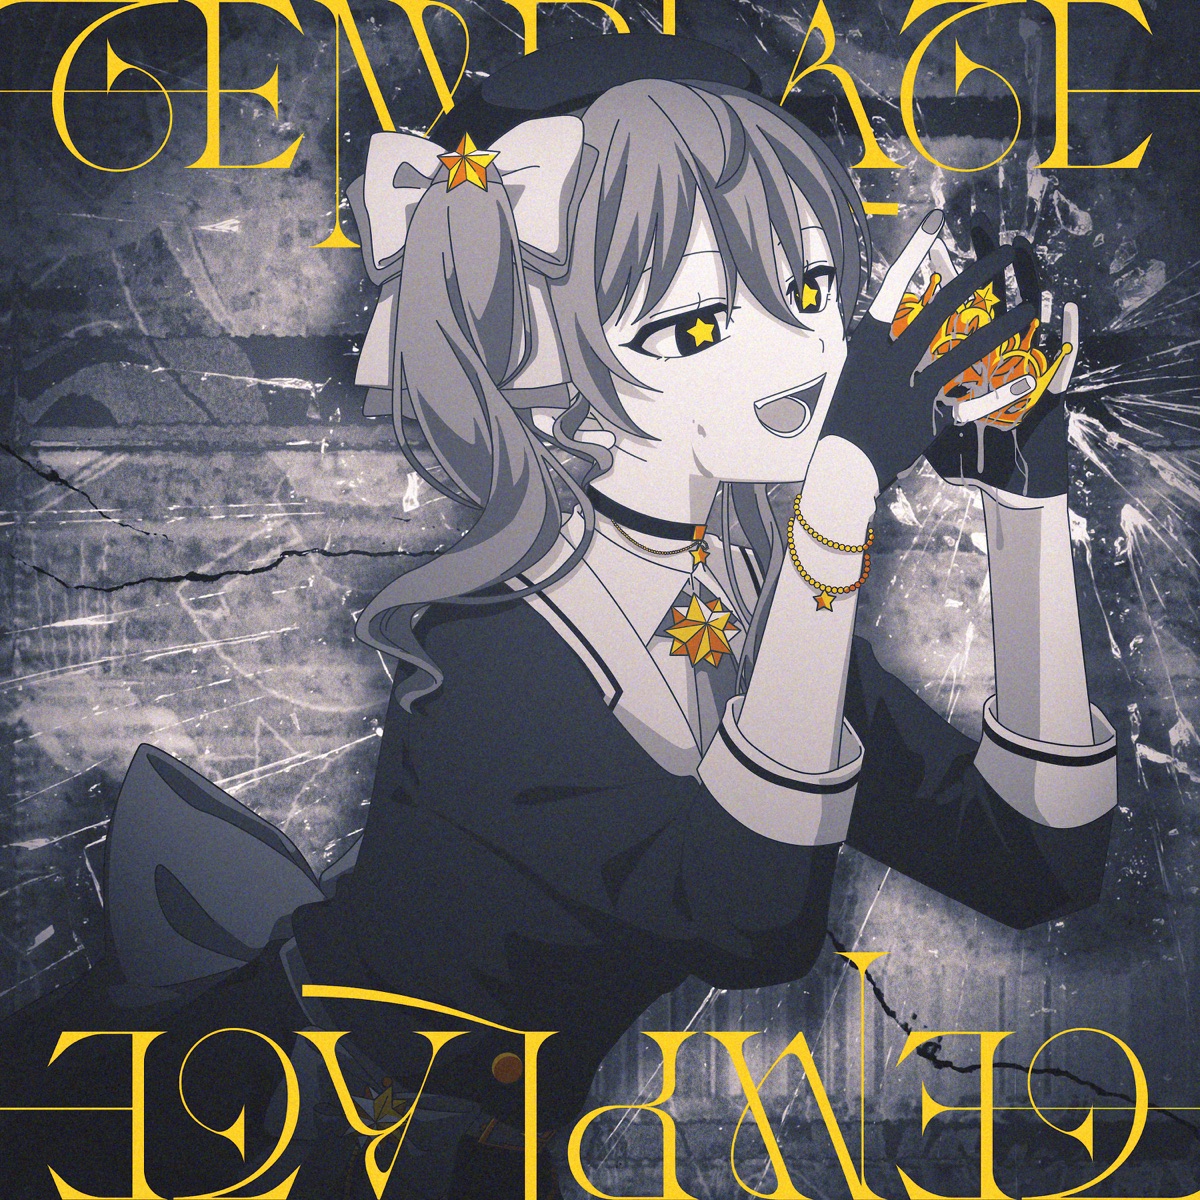 Cover for『Hoshimachi Suisei - Wicked feat. Mori Calliope』from the release『TEMPLATE / Wicked feat. Mori Calliope』